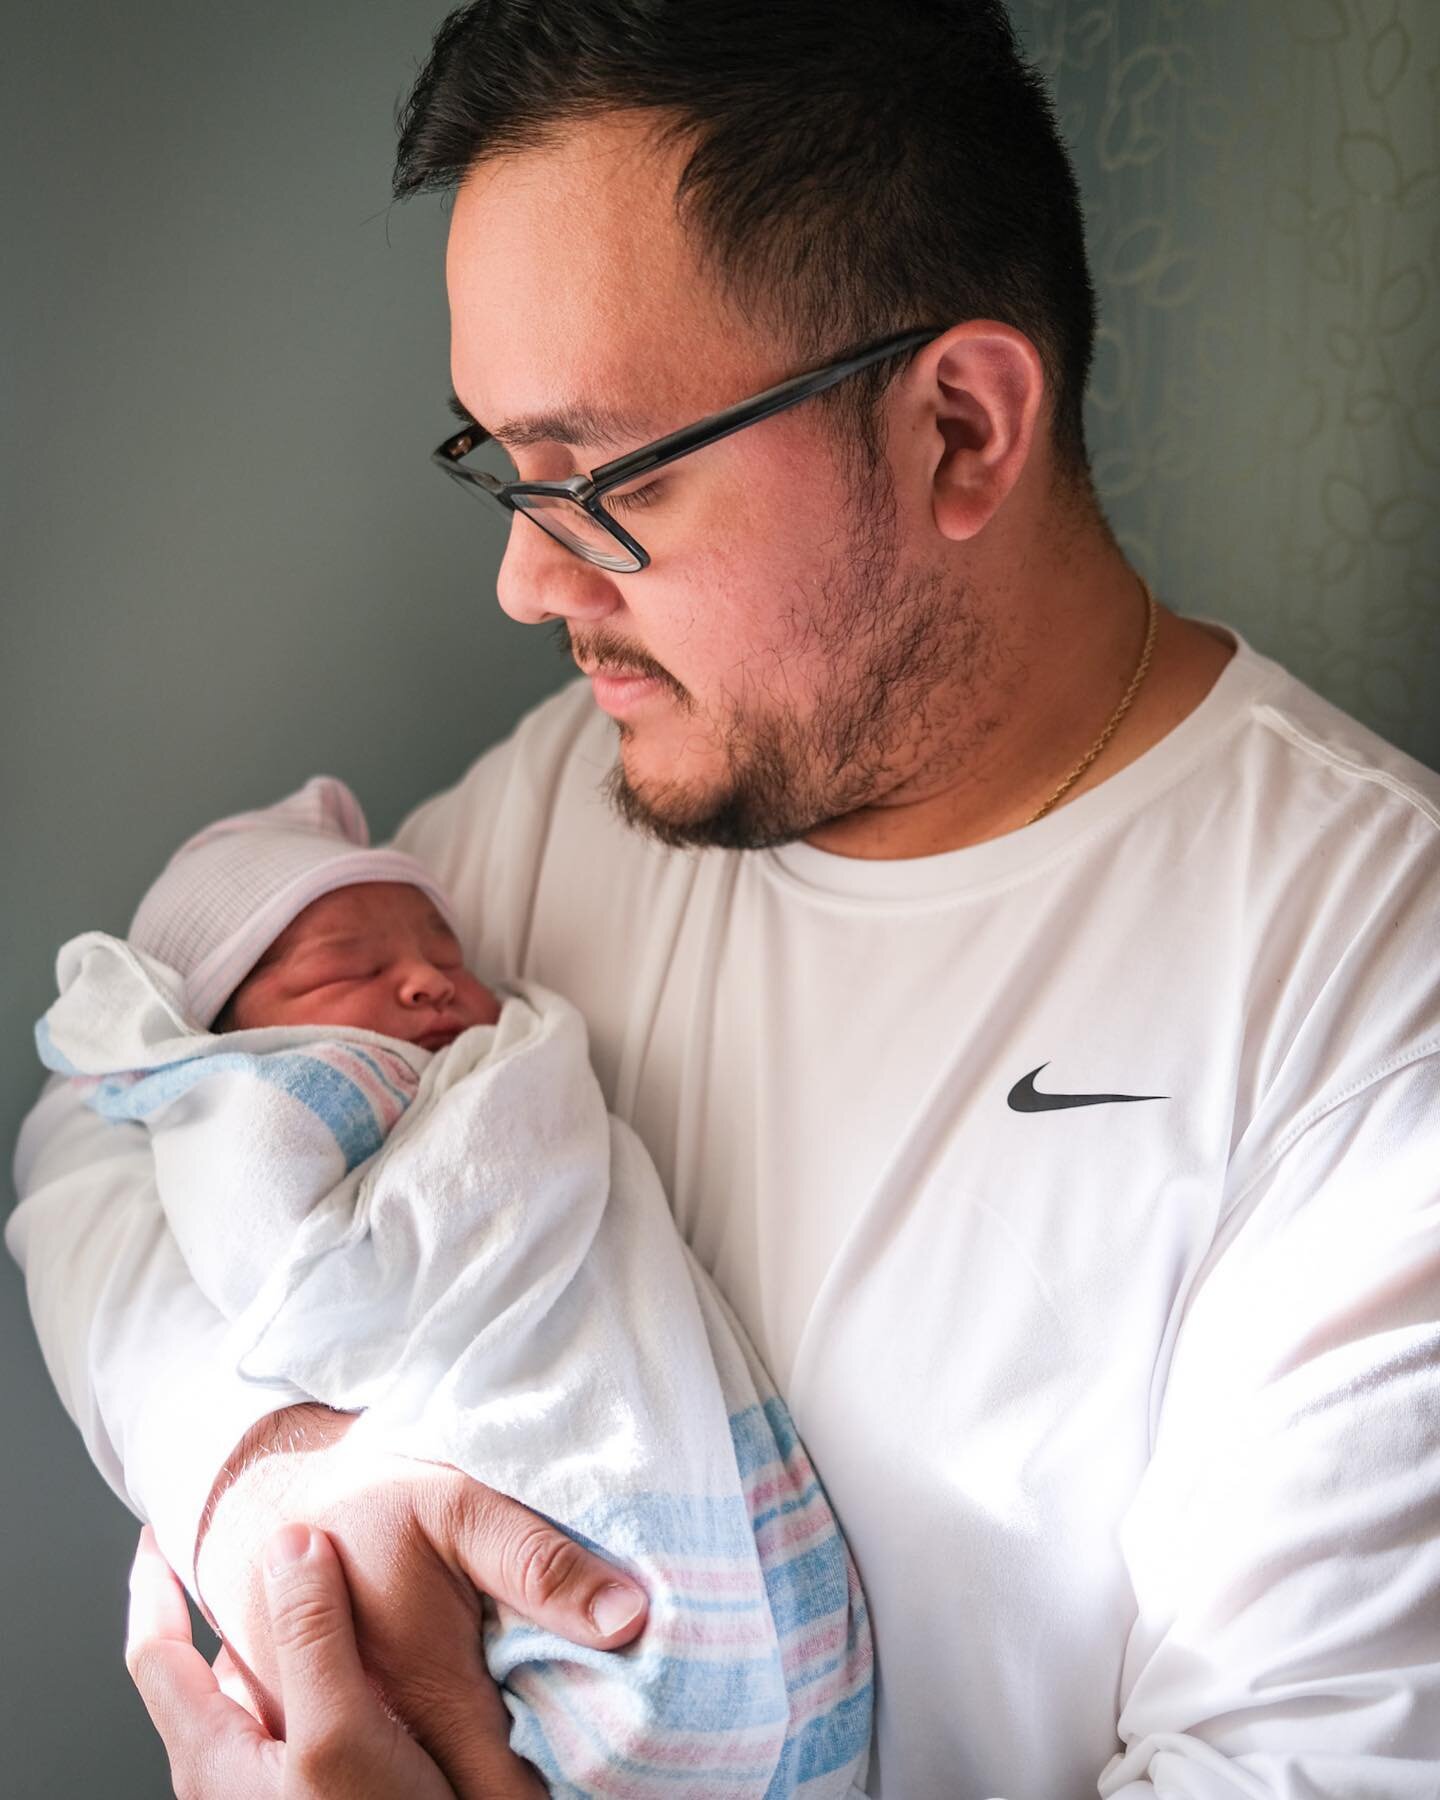 As most know, I&rsquo;m a very private person. But on September 9, 2020 my son Trae was born. This is definitely the proudest moment in my life.  I never wanted to have kids. But, God gave me the strength and courage to change that. With all the fami